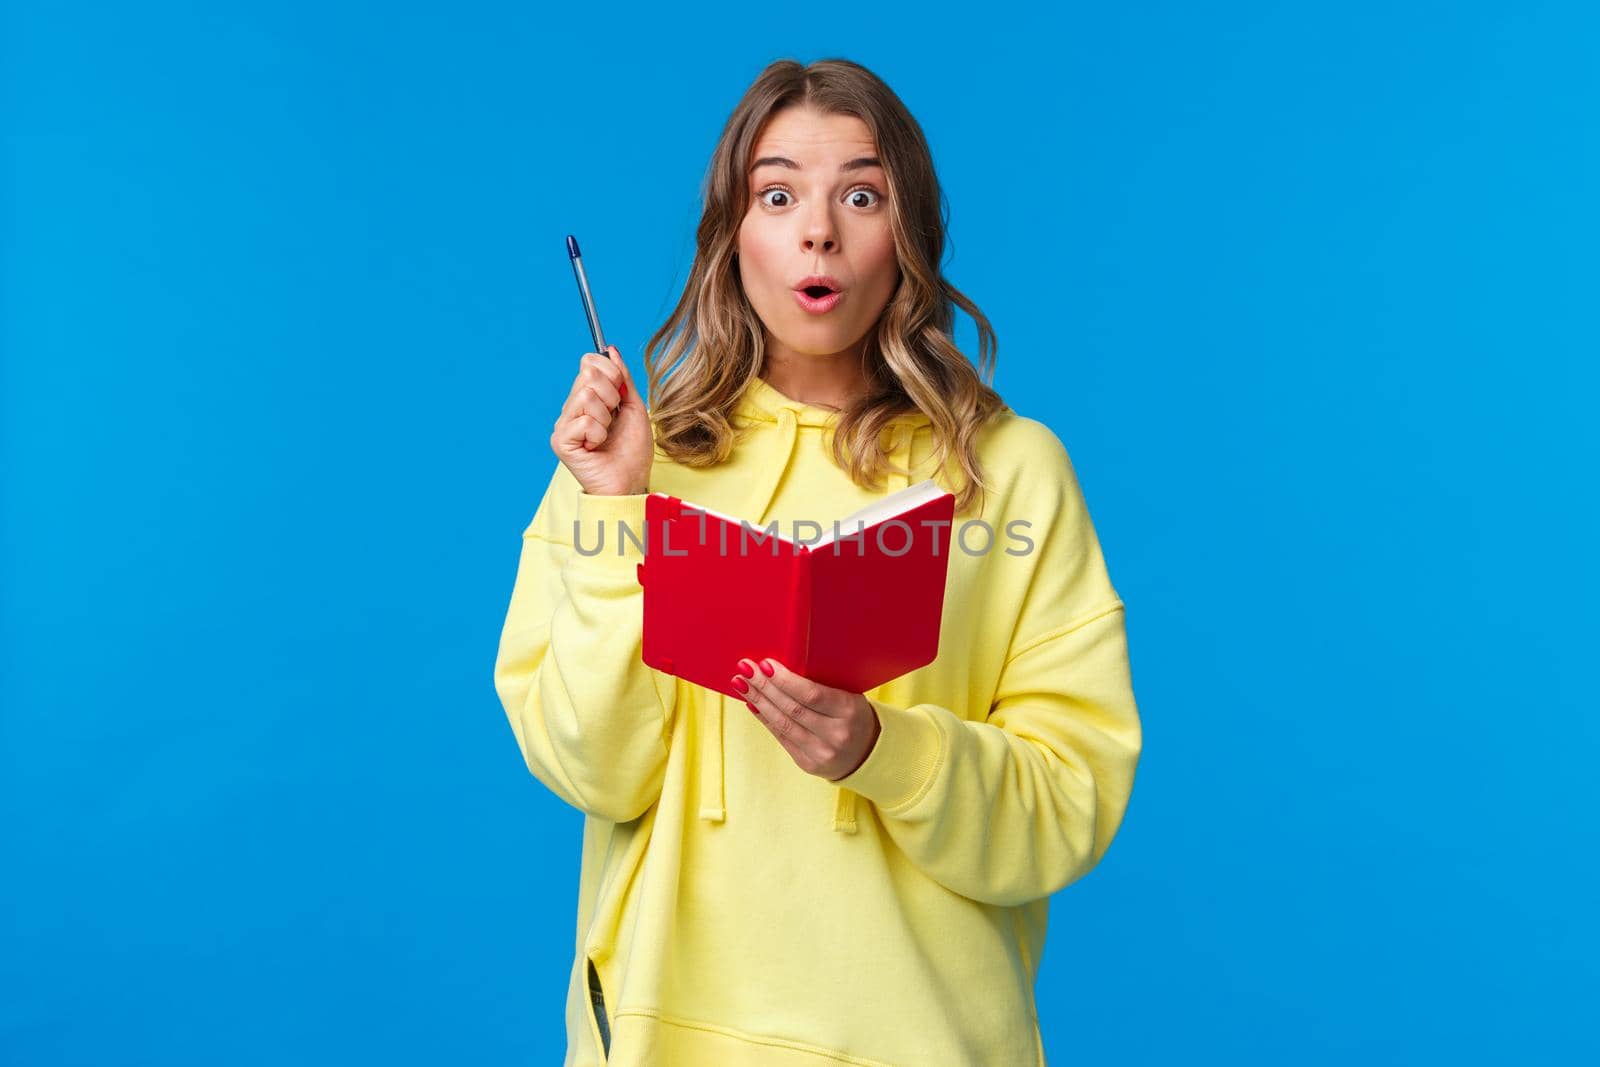 Girl doing homework finally have great plan, made-up idea for story as writing it in red notebook, raise pen eureka gesture, looking amazed camera, standing blue background in yellow hoodie.